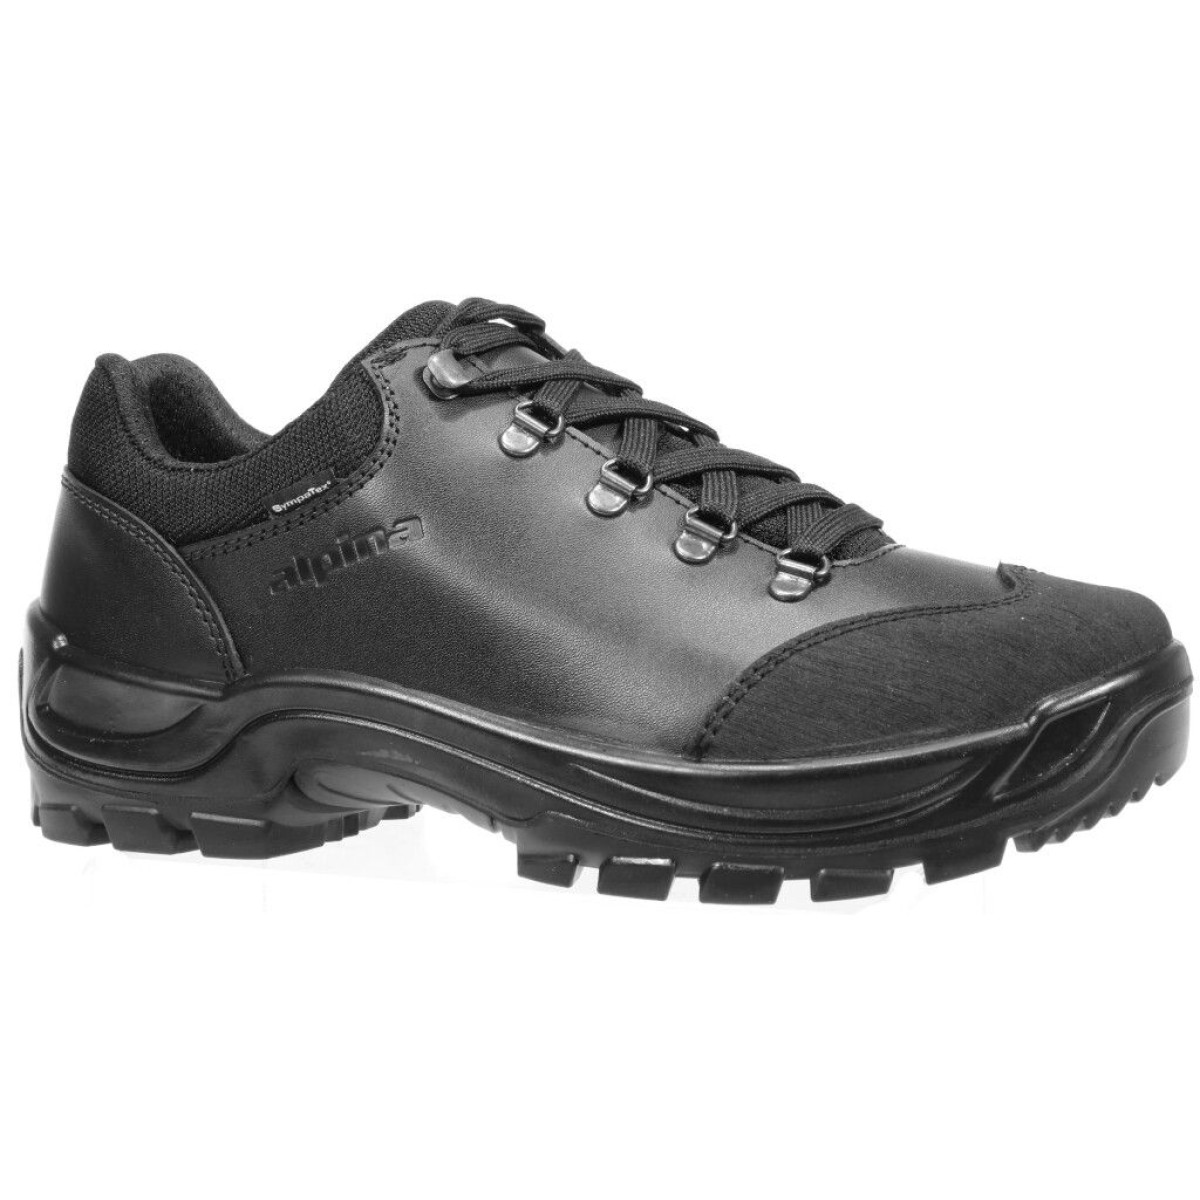 Hiking shoes Dovre low black